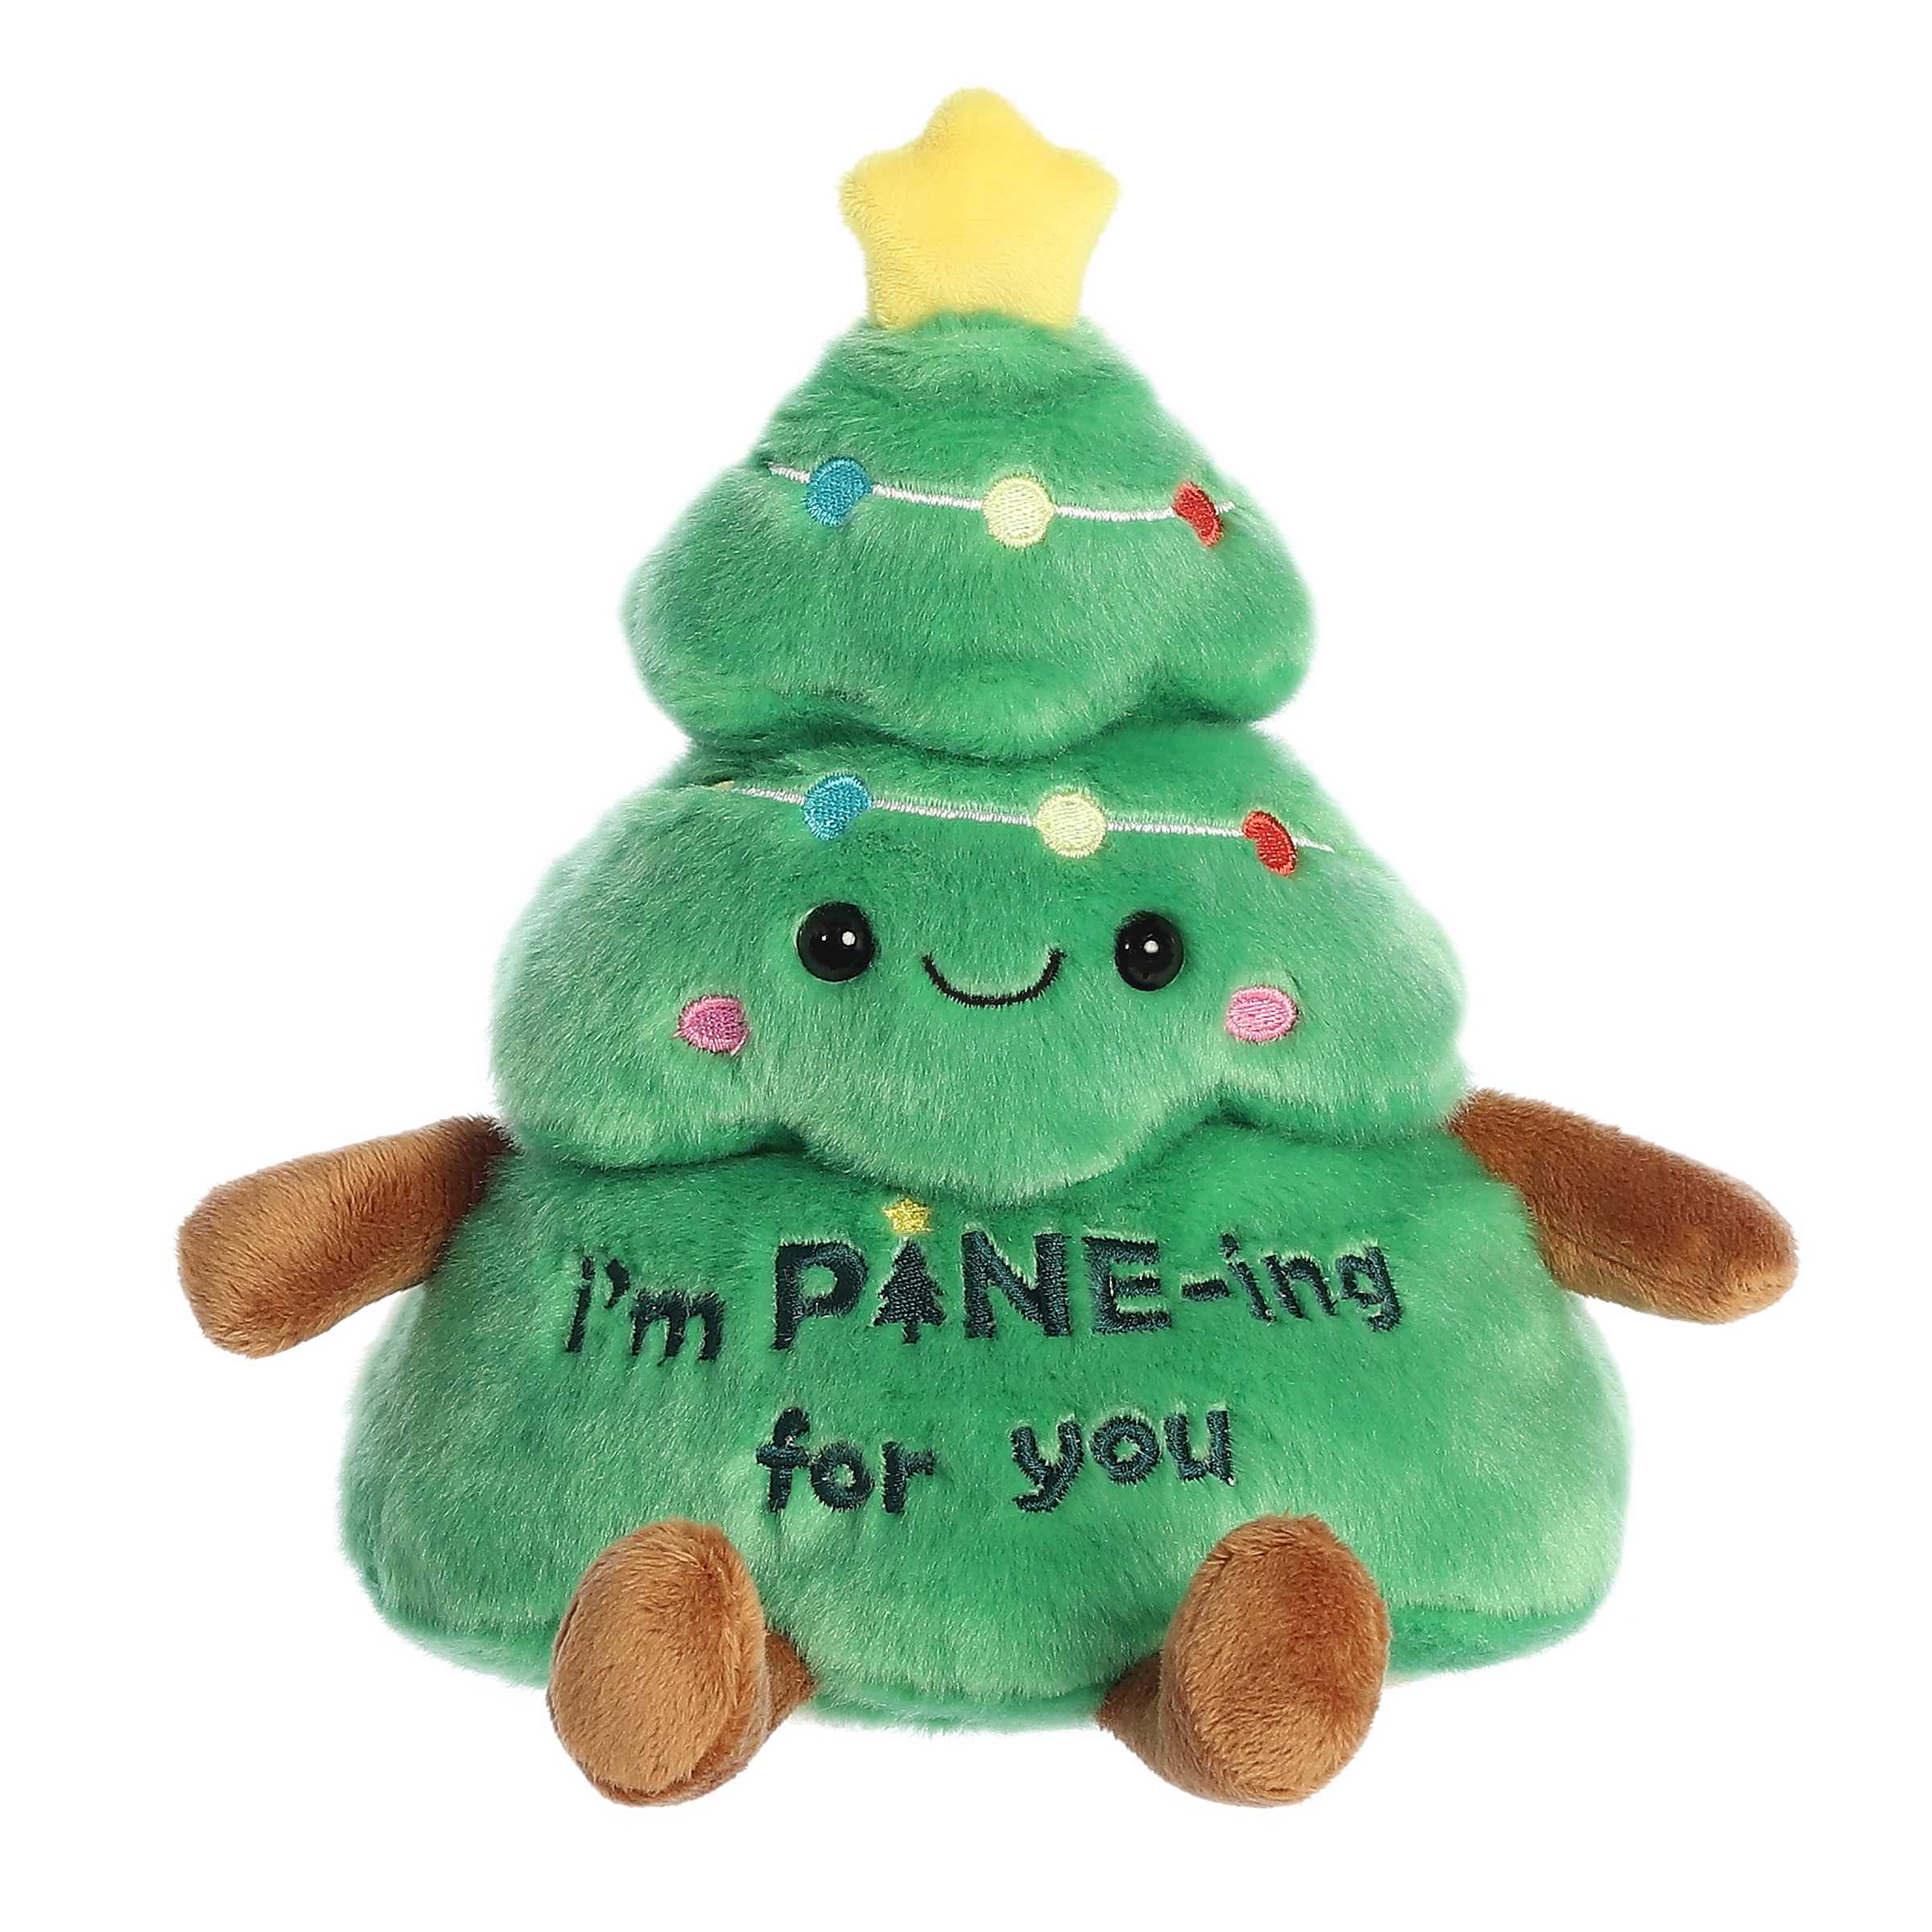 Adorable happy Christmas tree plush toy with festive Christmas lights and a star on top. Embroidered phrase across the base of the tree reading "I'm PINE-ing for you"